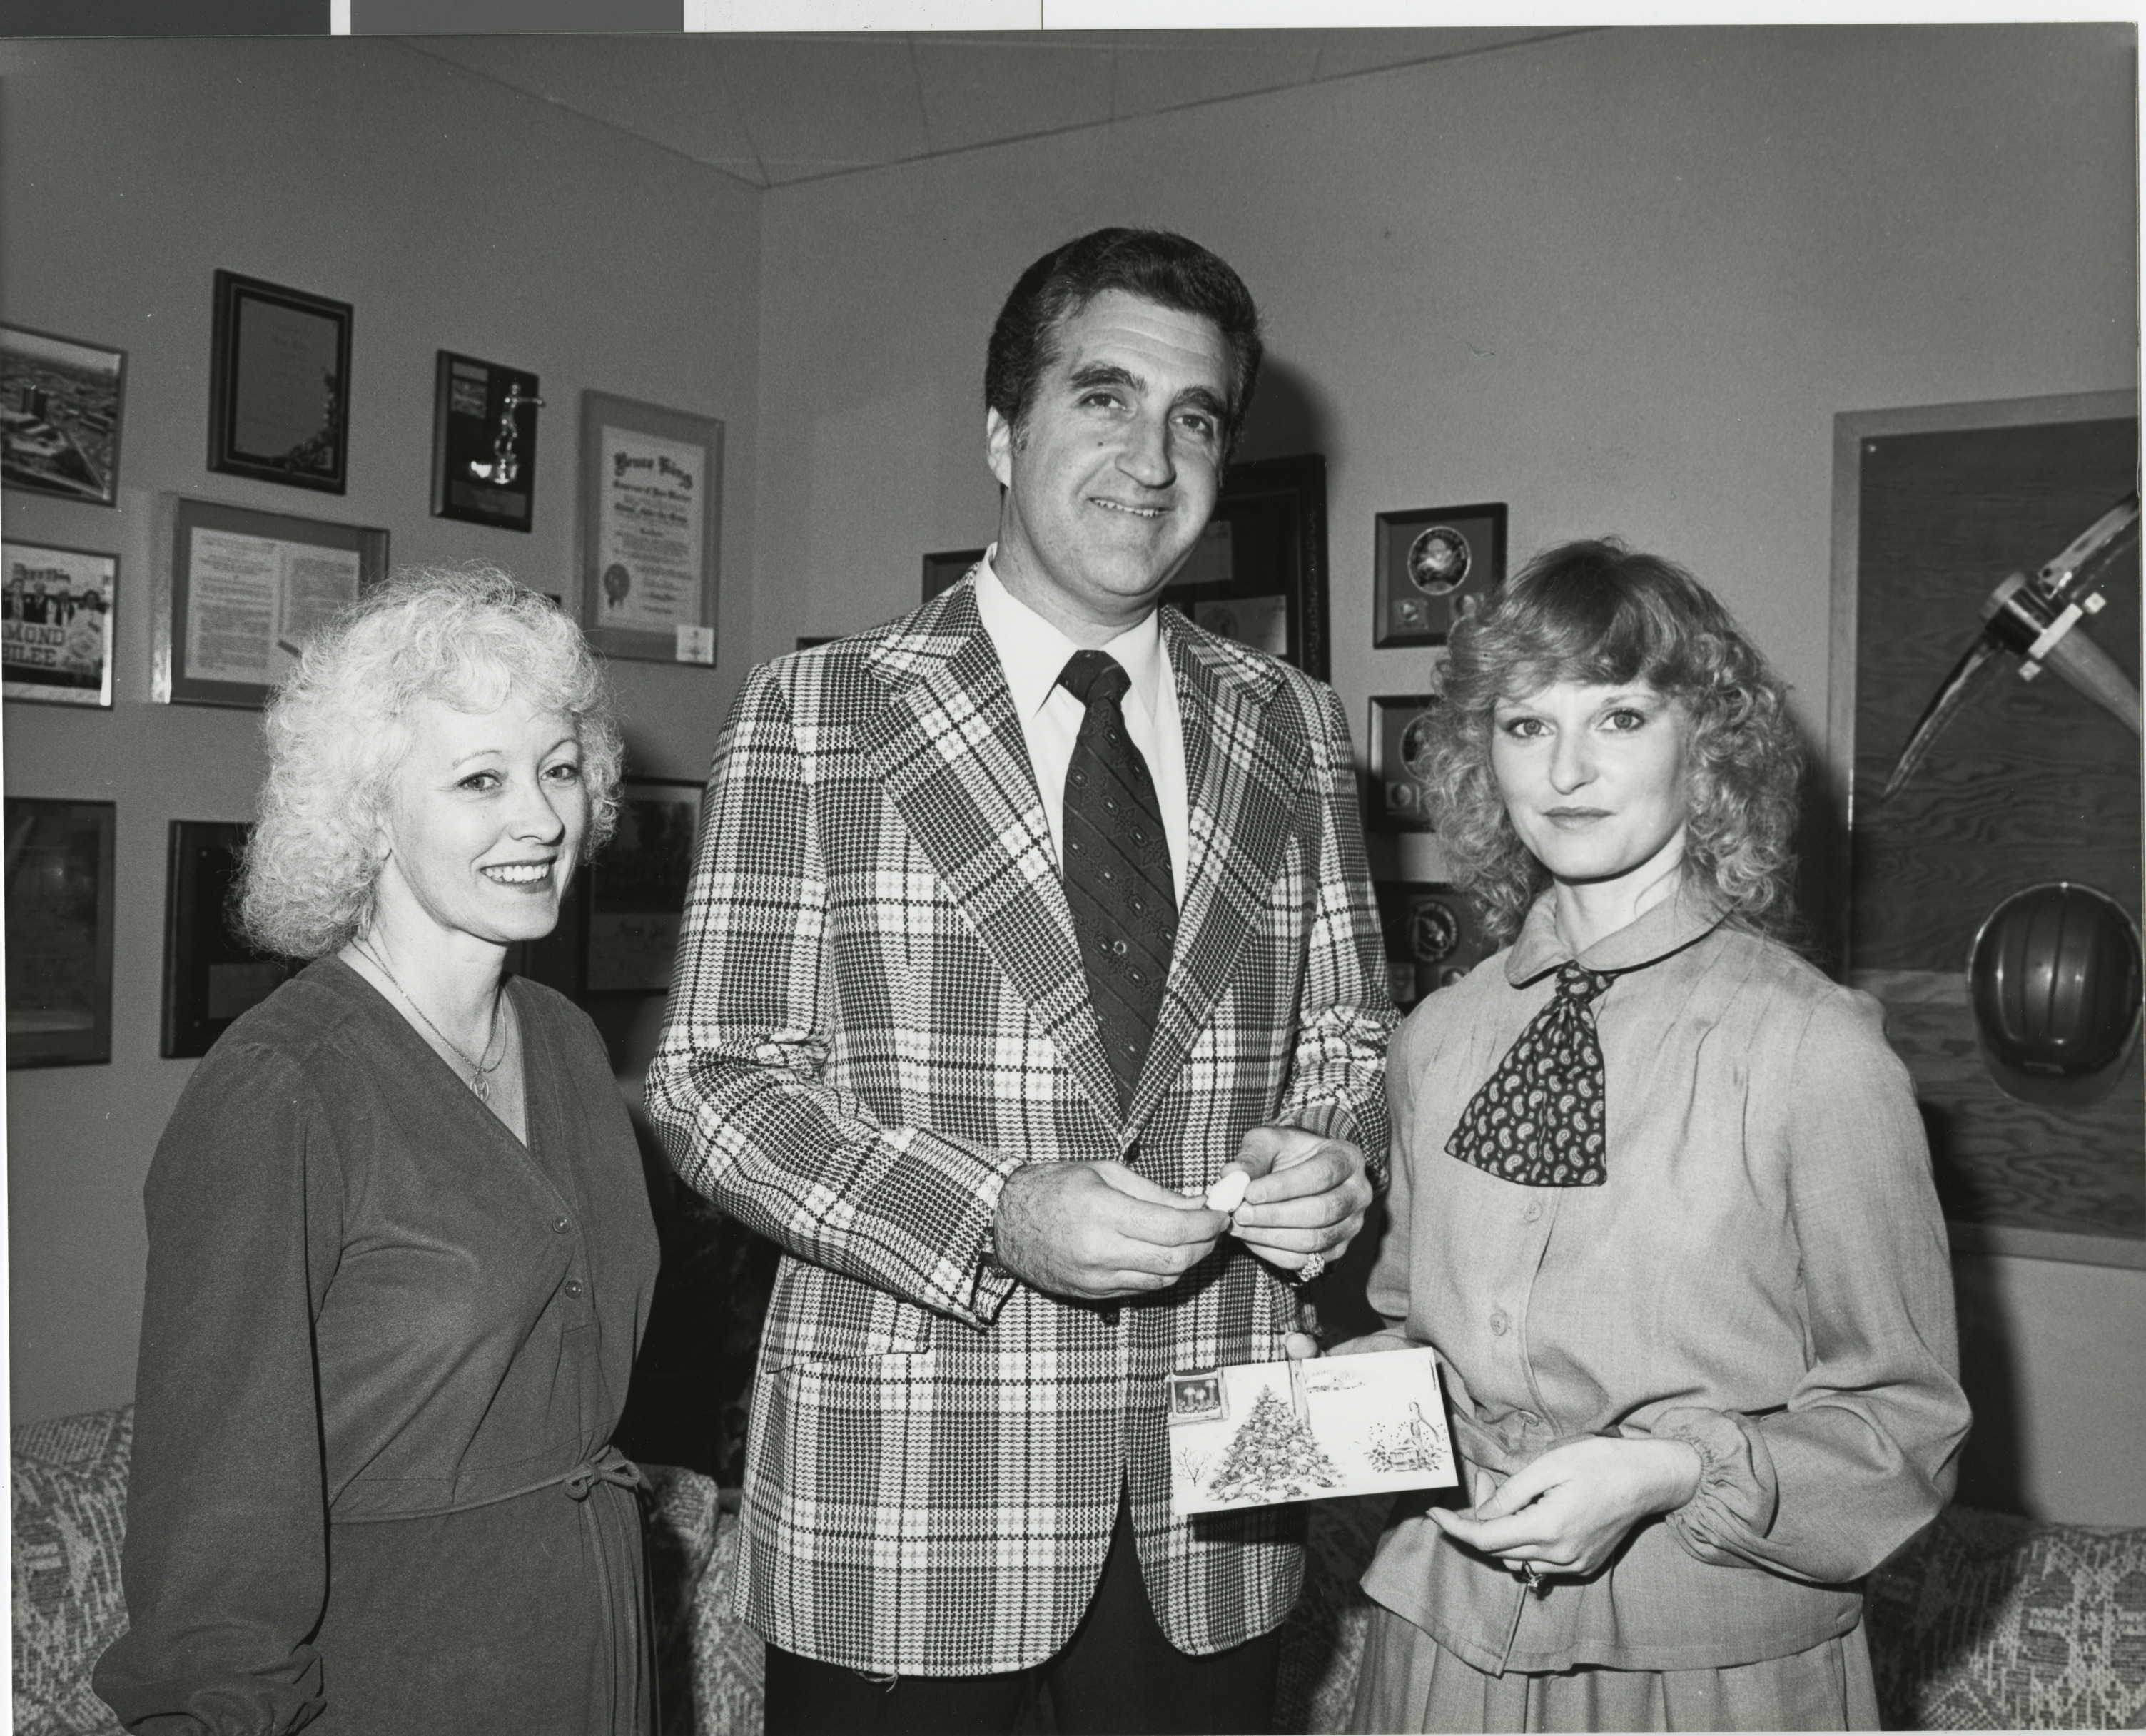 Photograph of Mary Coon, Ron Lurie and Sally Brinkman, November 17, 1982